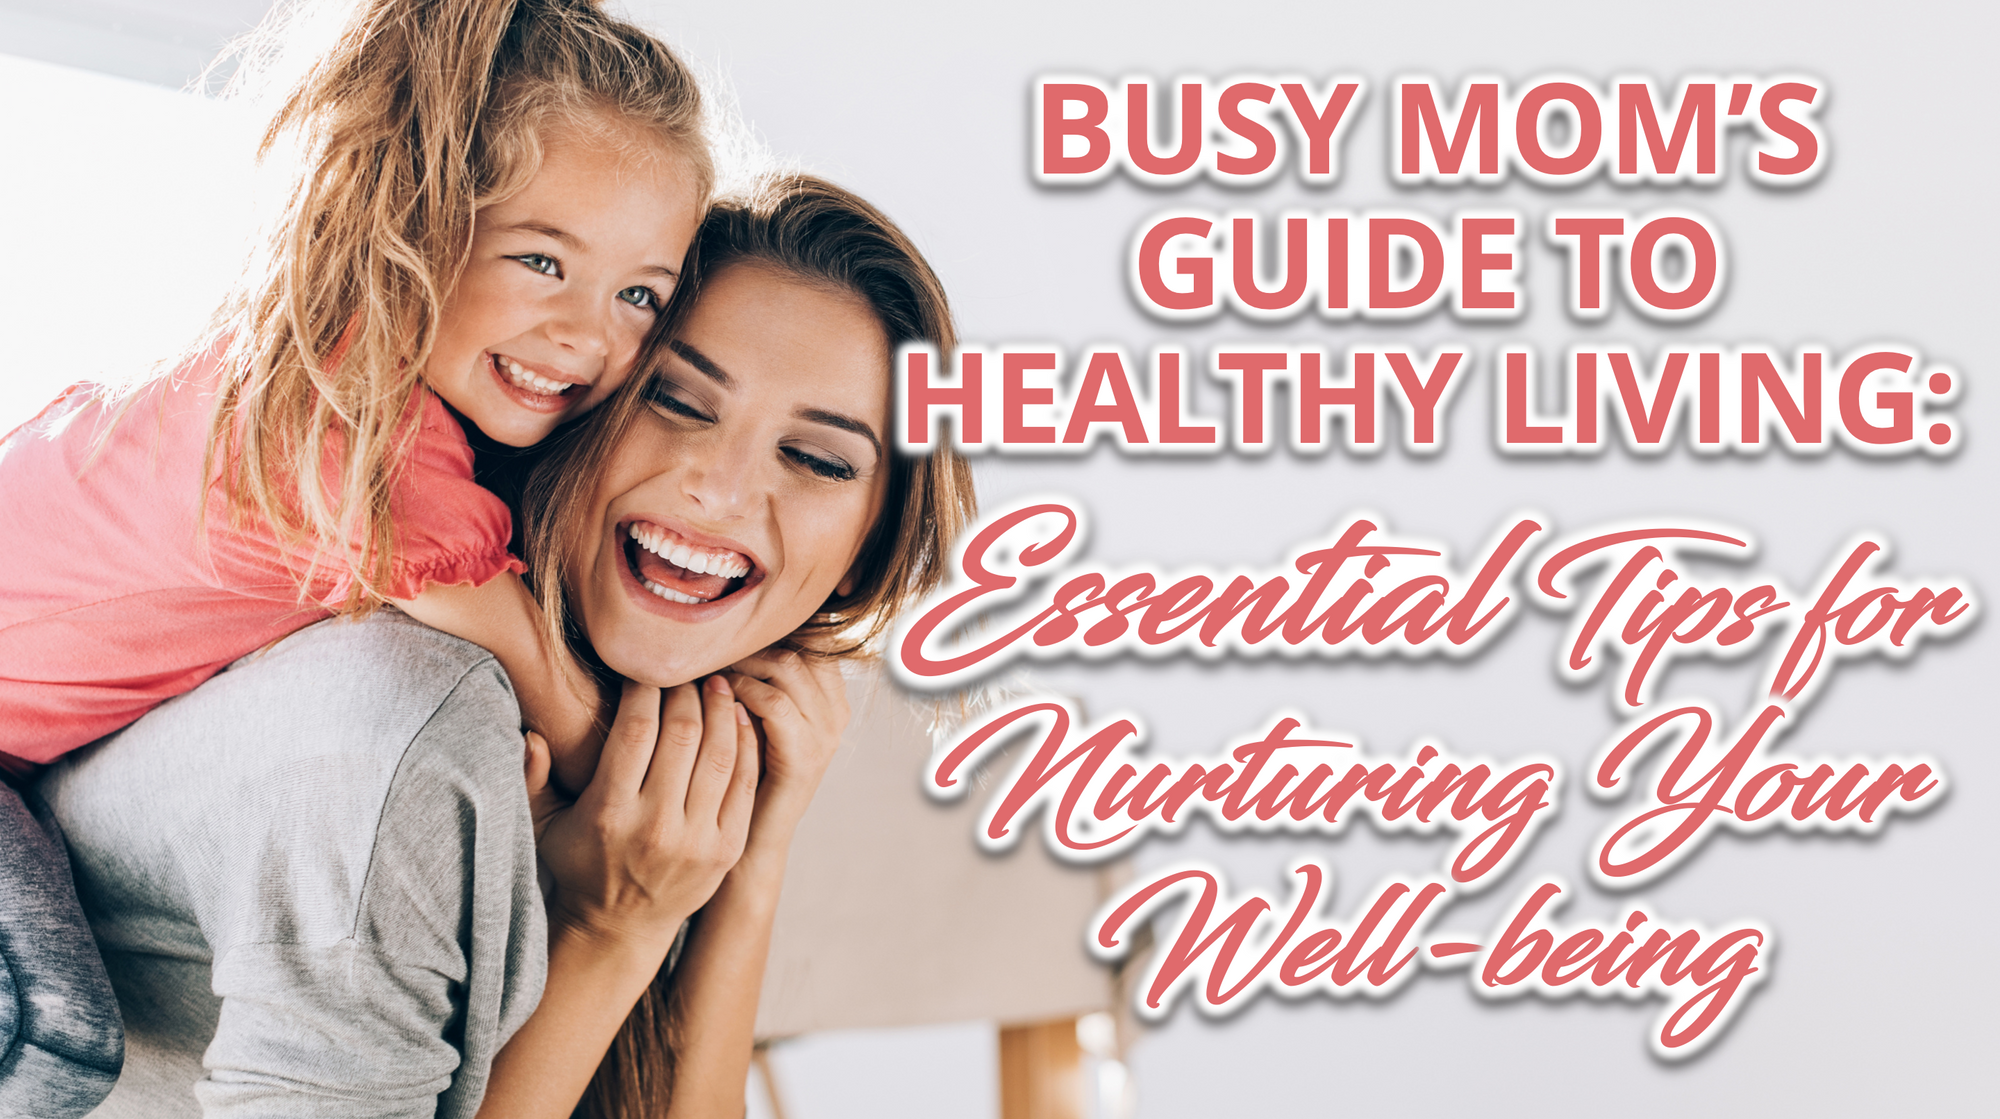 A smiling mom and daughter with a text "Busy Mom's guide to healthy living: Essential Tips for Nurturing your well-being"